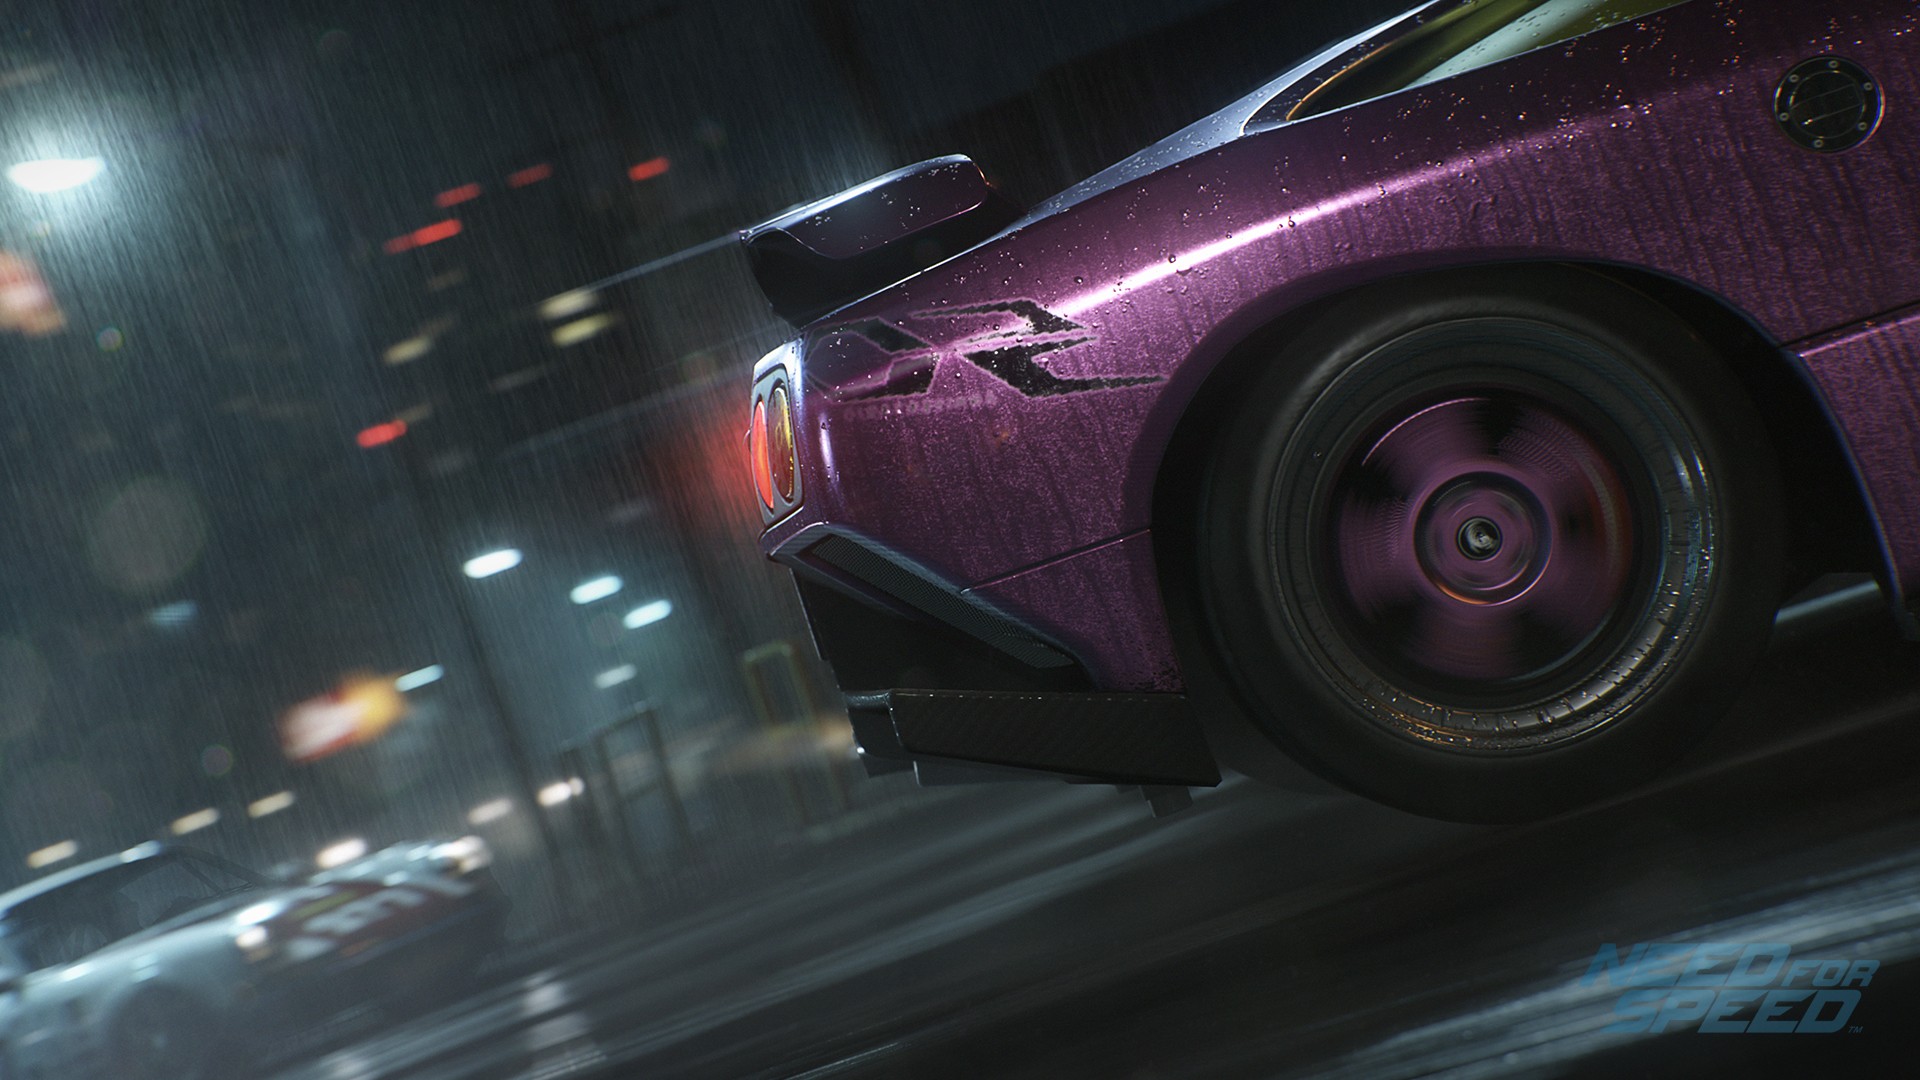 General 1920x1080 car vehicle Need for Speed video games rain purple cars colored wheels